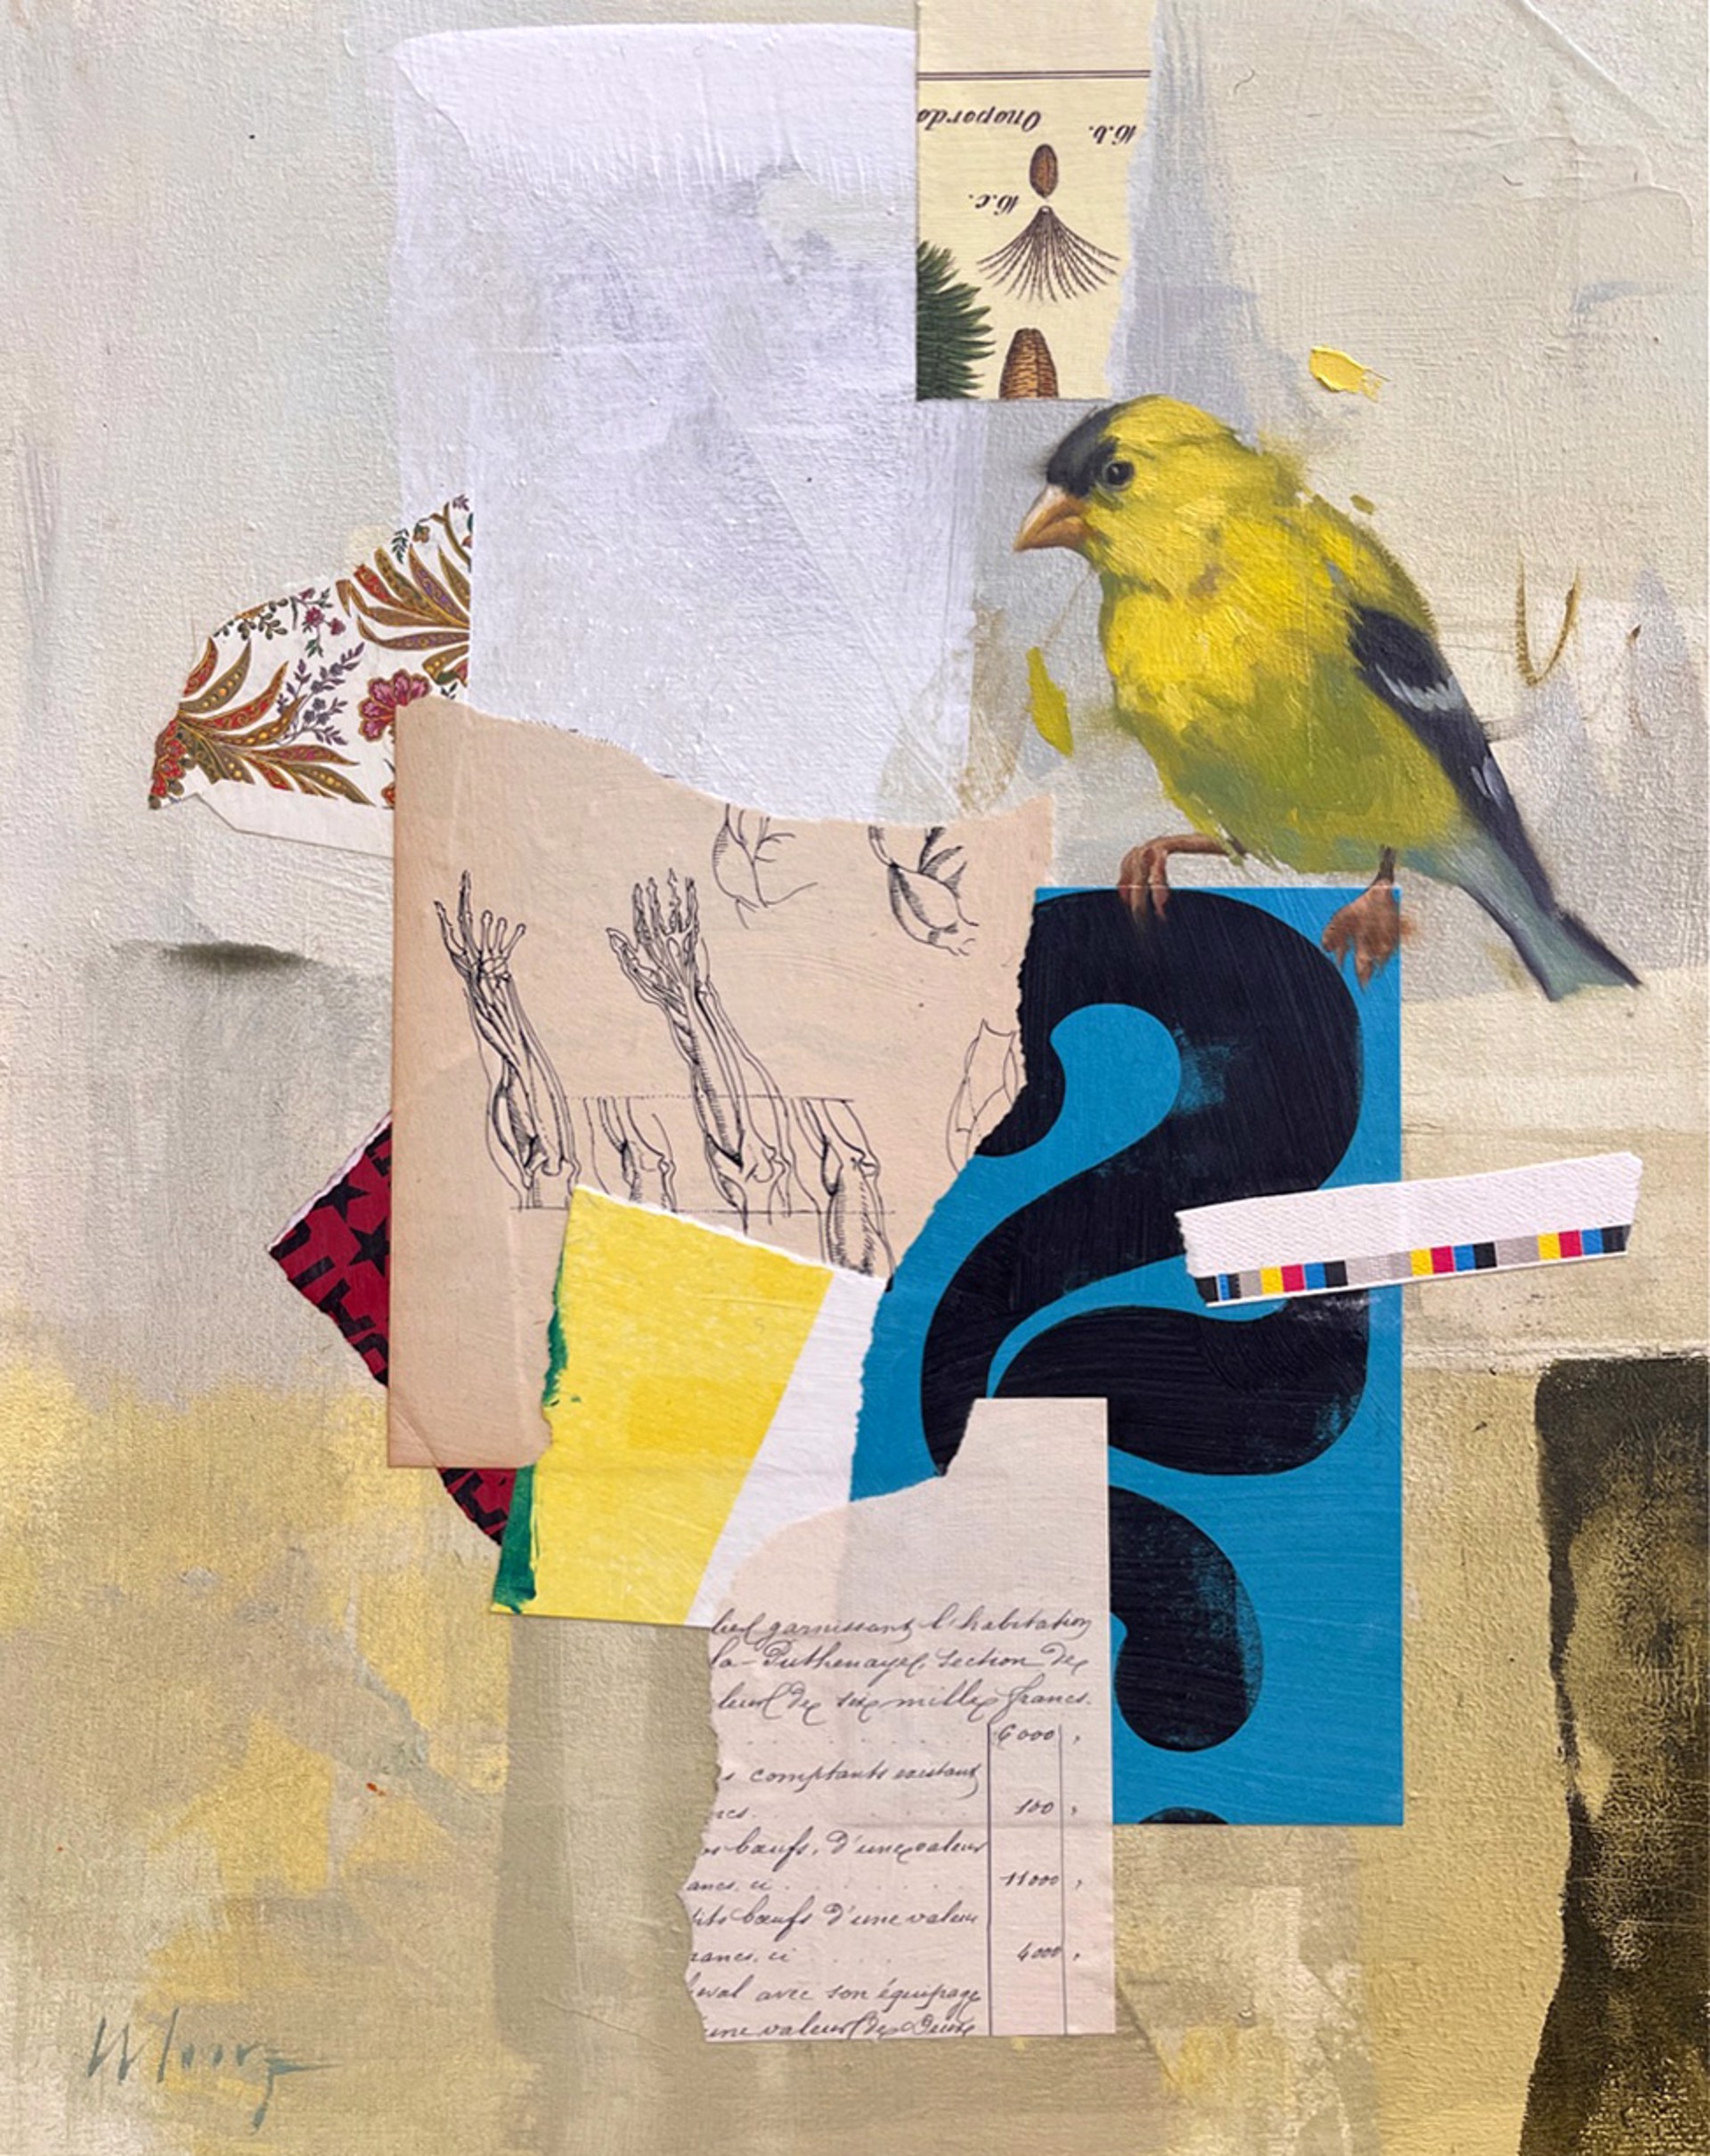 Original Oil Painting By Larry Moore Of A Goldfinch With A Colorful Mixed Media Collage Background